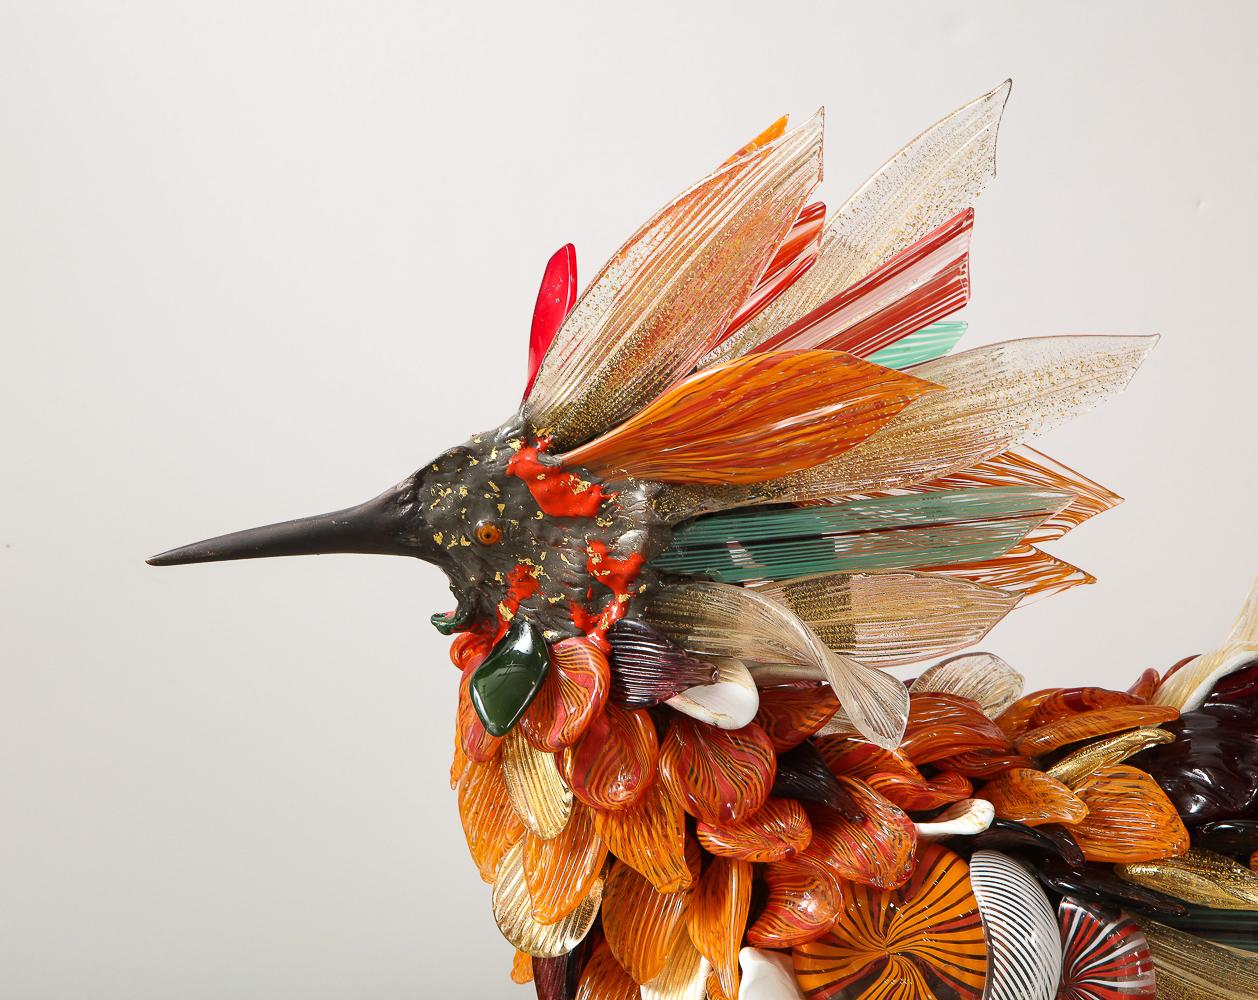 Glass and bronze sculpture. Work made with applied feathers in opaque and transparent polychrome glass produced directly by Toni Zuccheri in 2007. The base and skeleton are in lost-wax cast bronze made in 1987 by Fonderia Opere d'Arte O. Brustolin